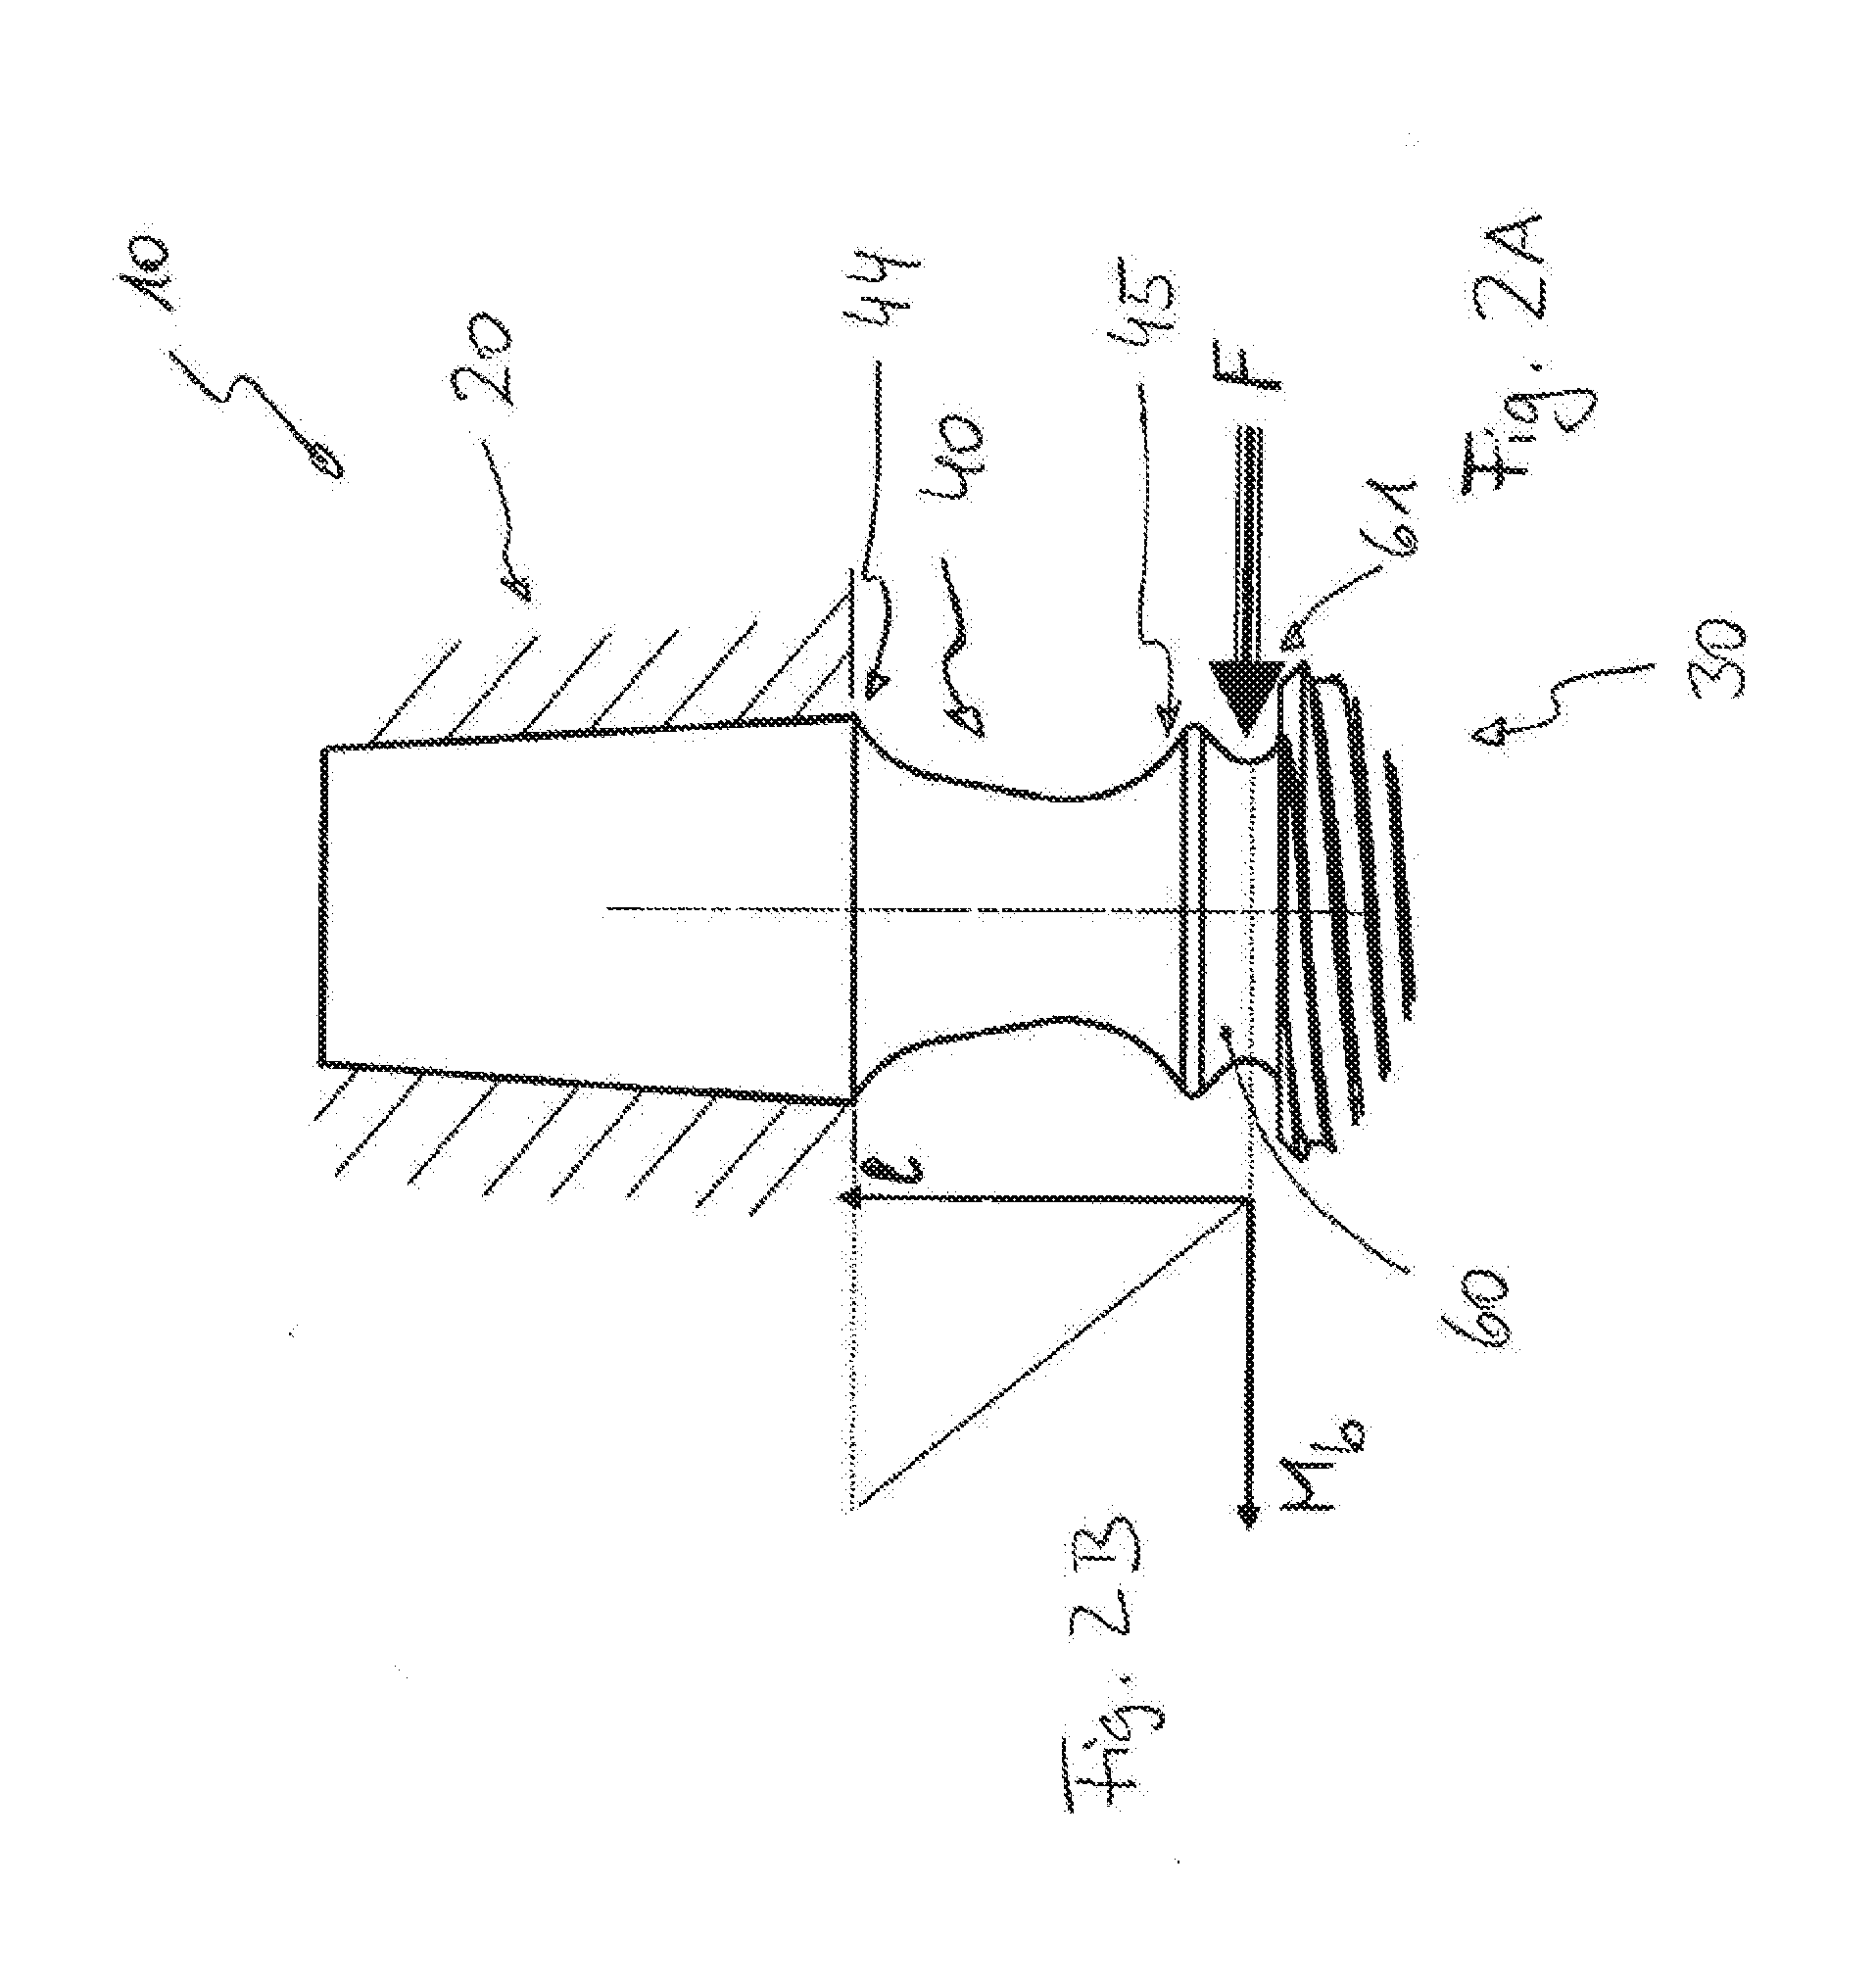 One-part tooth implant, device for bending an implant, and method for bending an implant